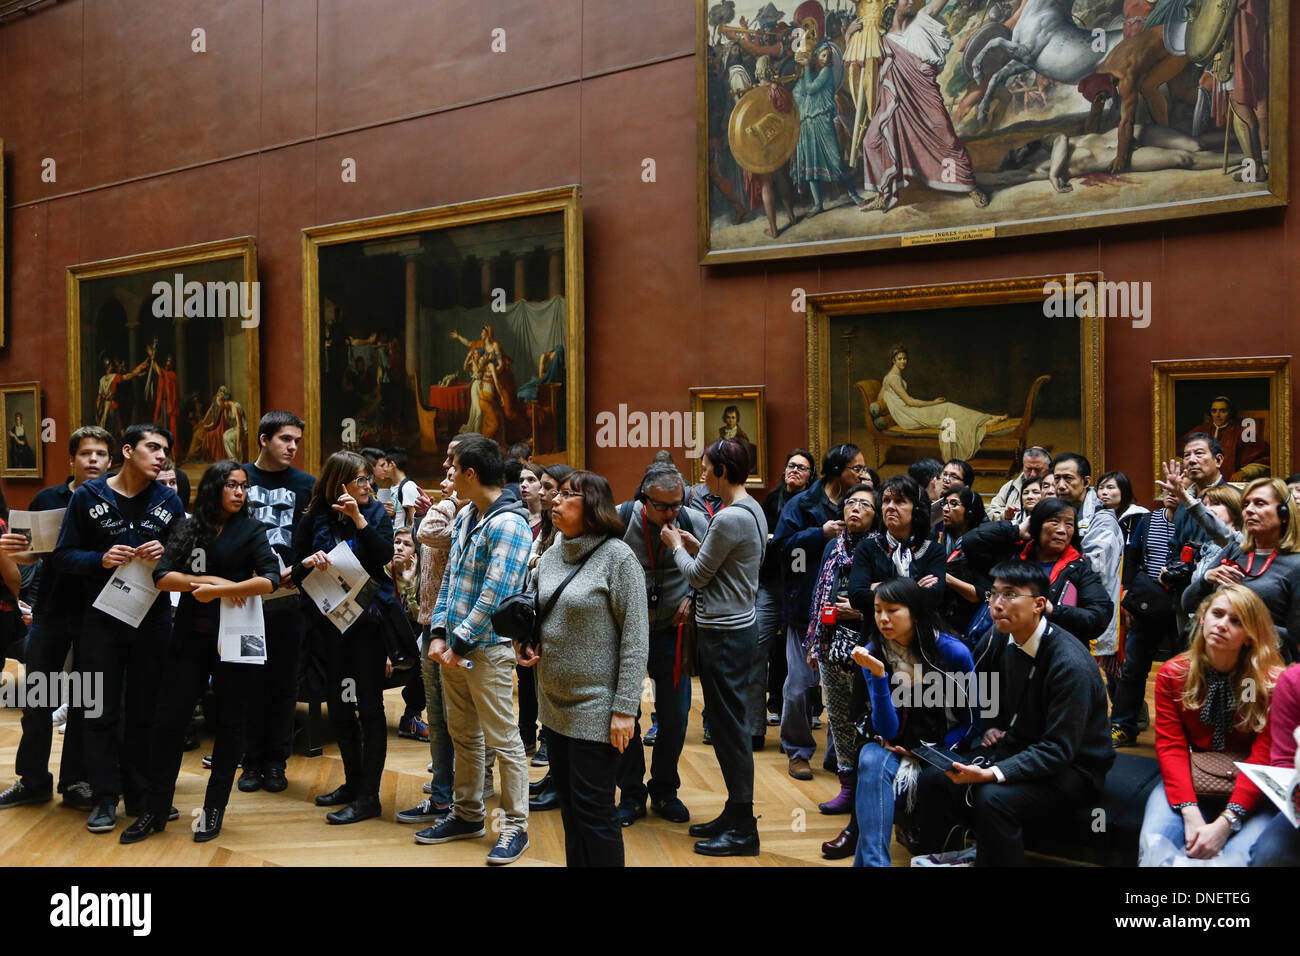 Tourists in the Grand Gallery, Louvre Museum, Paris France Stock Photo